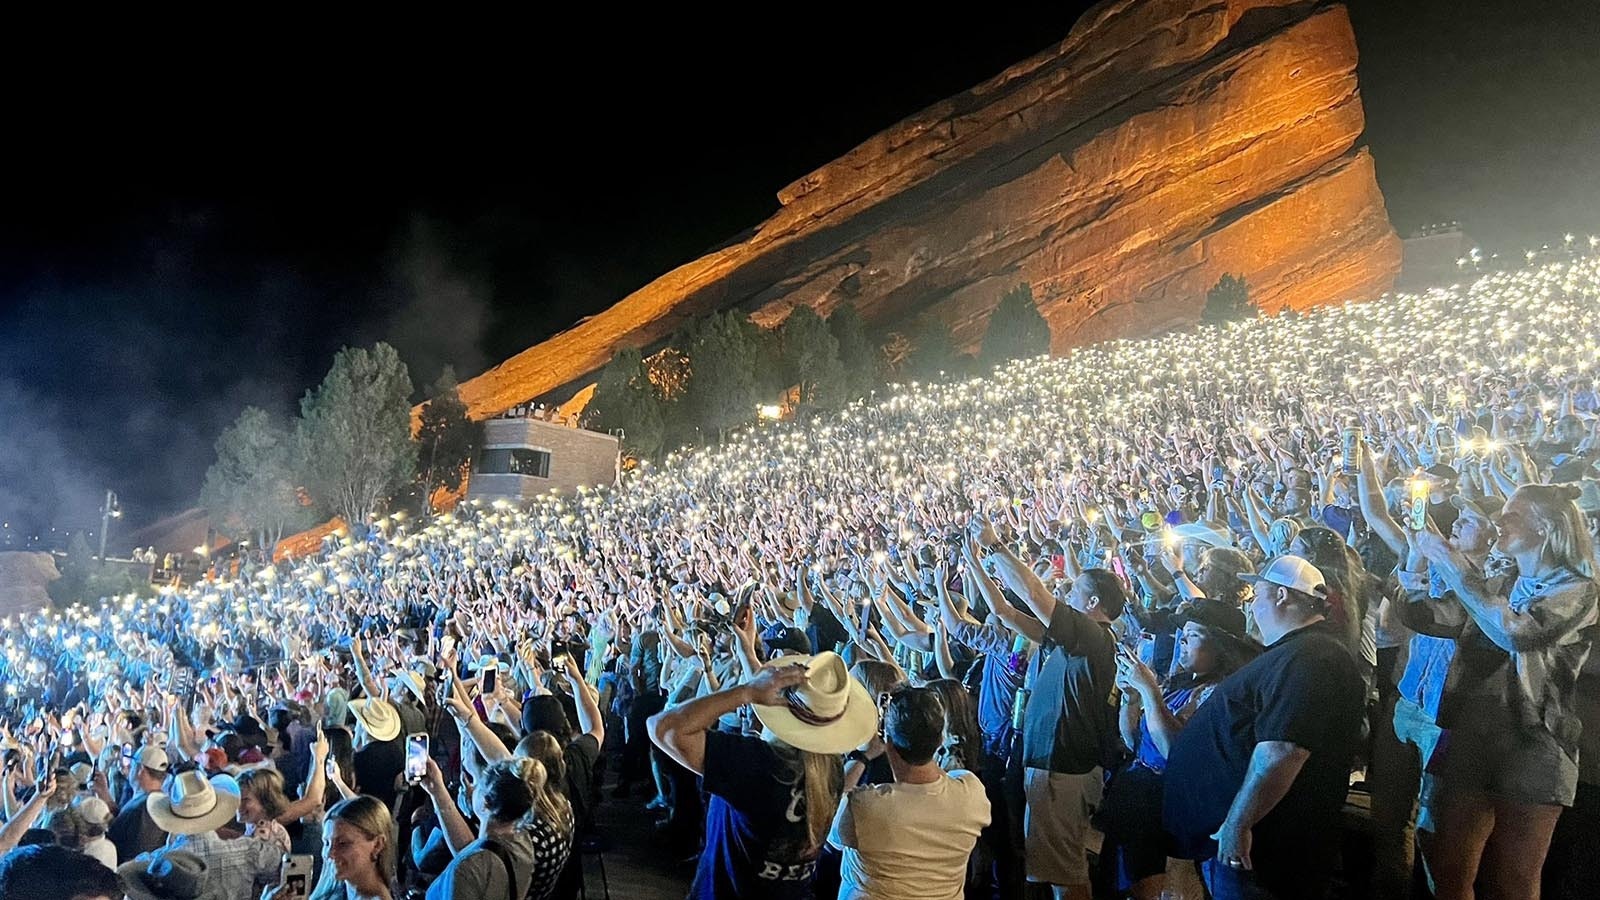 Wyoming's own Ian Munsick sold out Red Rocks for a June 6 performance, checking off a bucket-list item for the Sheridan Country-Western star.